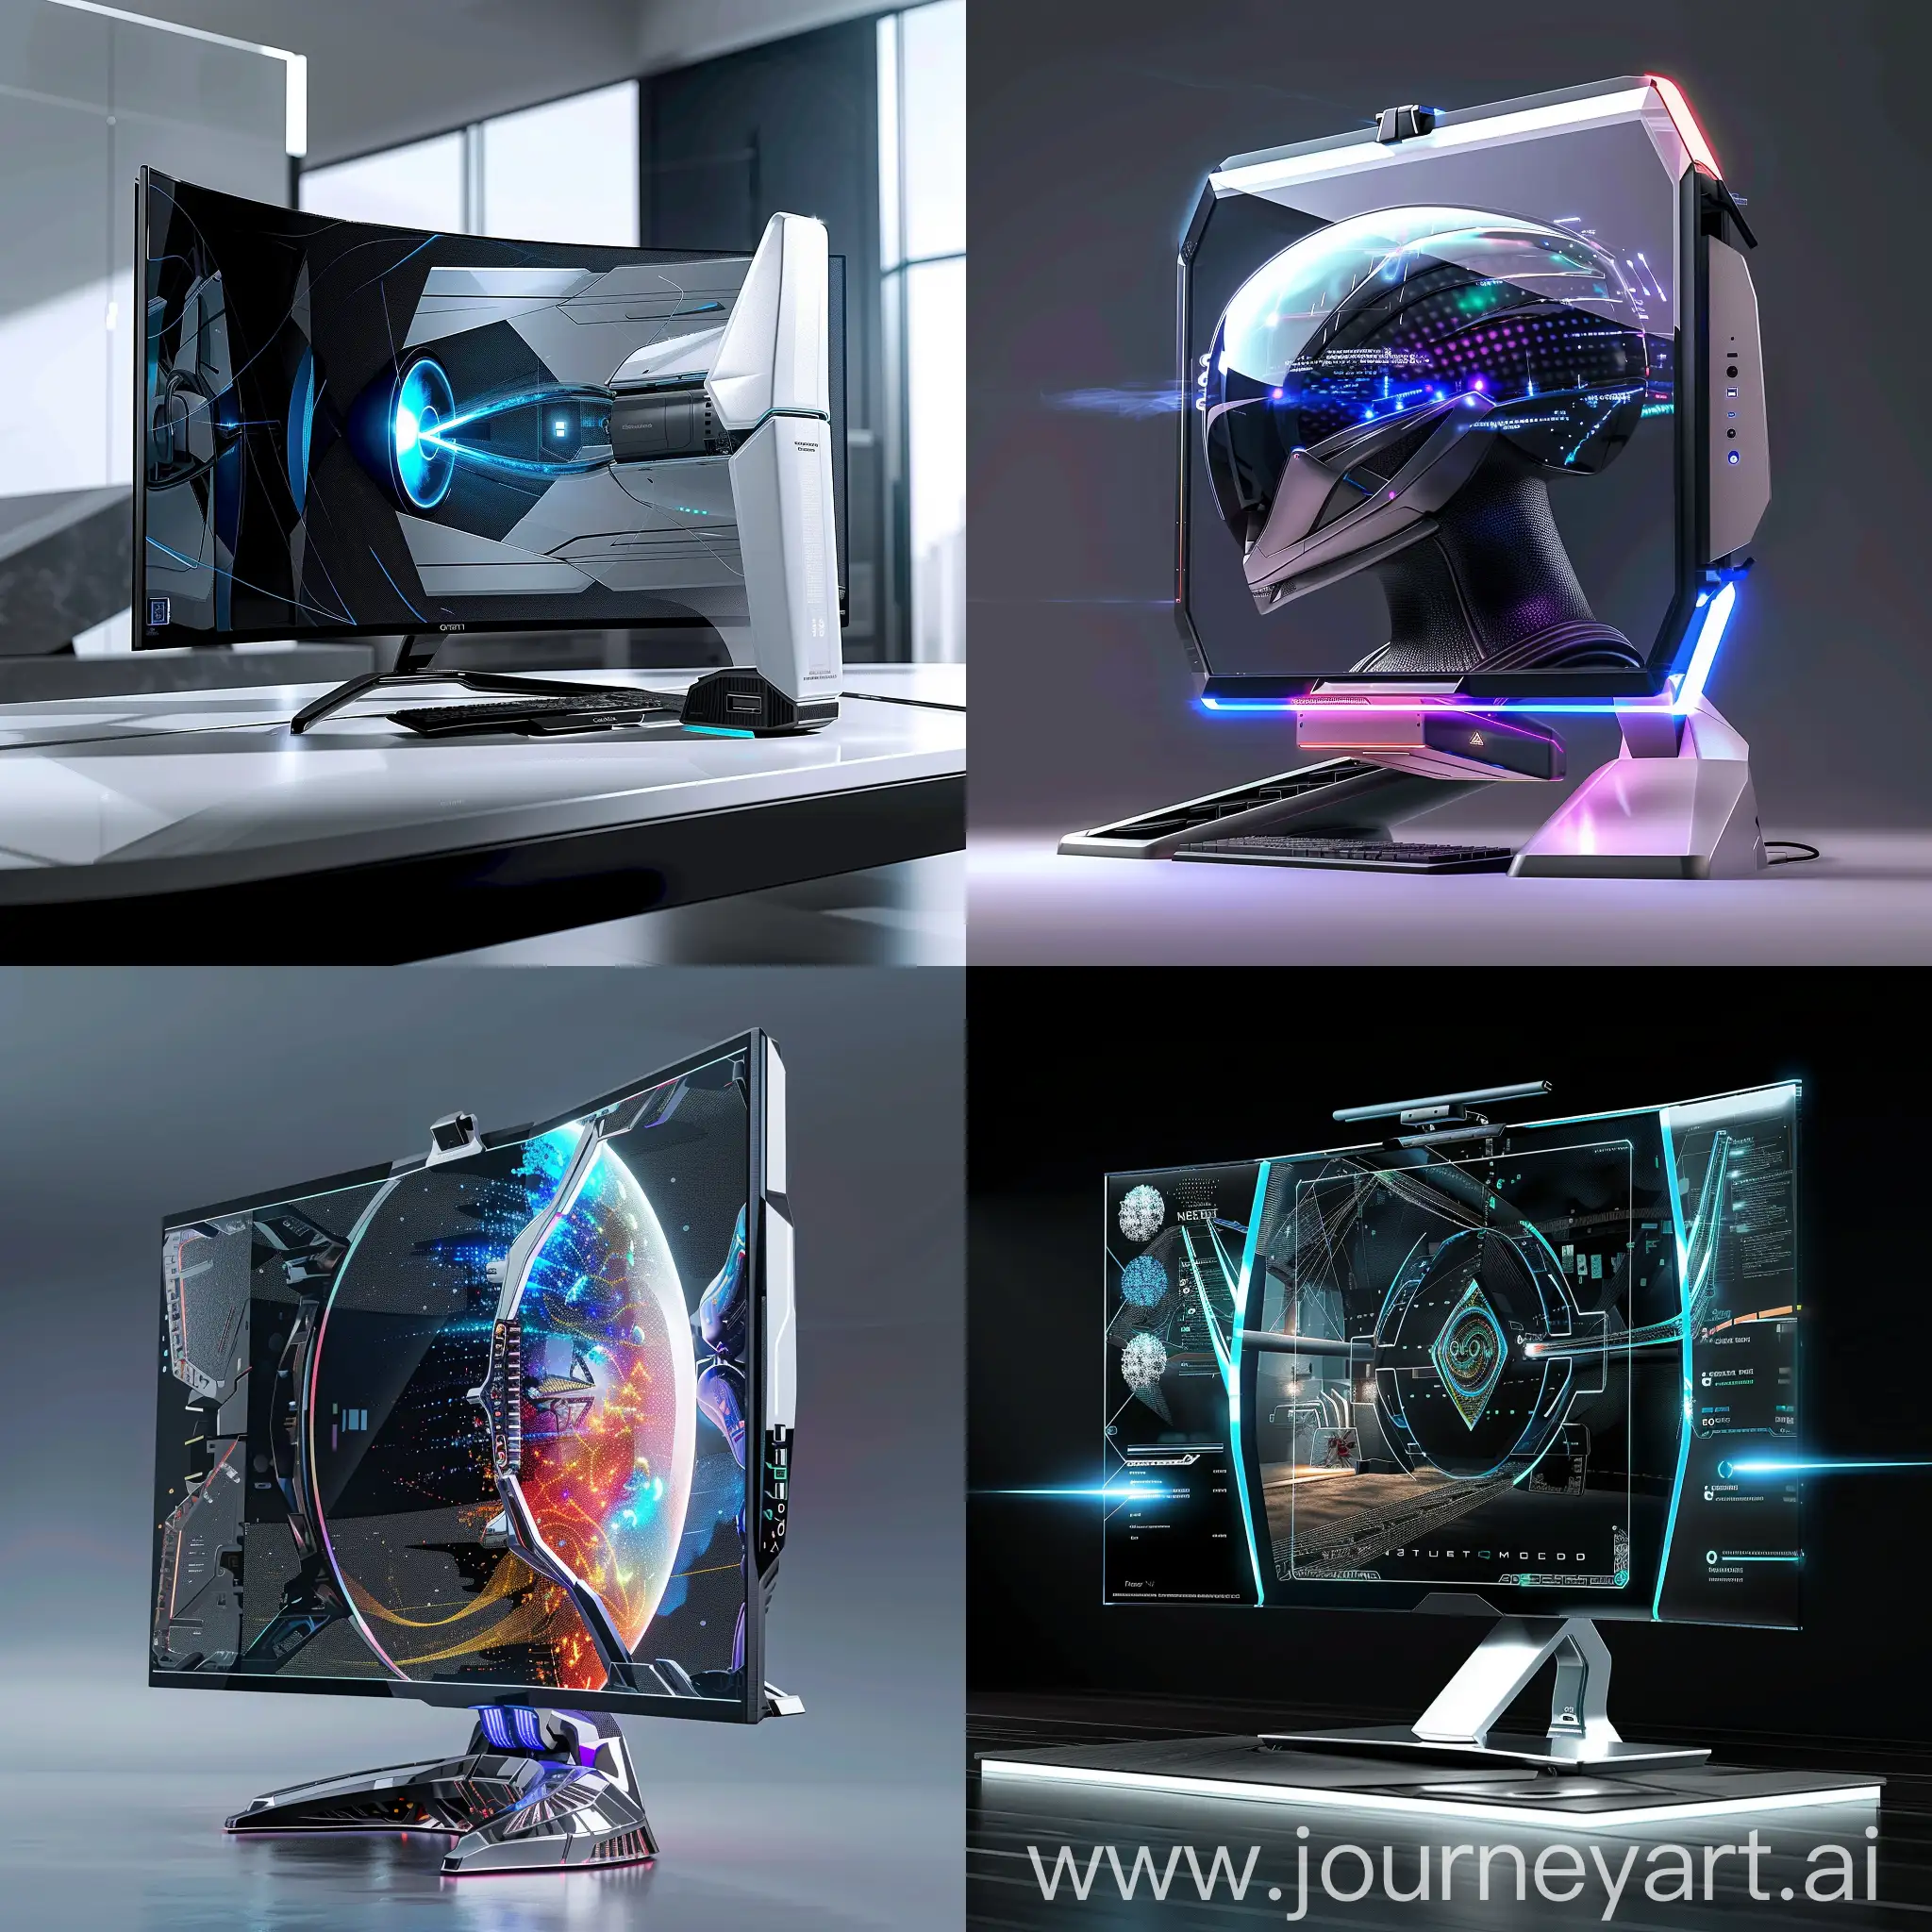 Futuristic PC monitor, in futuristic style, Transparent OLED Display, Holographic Projection, Augmented Reality (AR) Integration, Biometric Sensors, Self-Healing Materials, Neural Processing Unit (NPU), Wireless Power Transmission, Adaptive Refresh Rate, Quantum Dot Enhancement, Modular Design, Dynamic RGB Lighting, Nano-textured Surface, Ultra-slim Bezels, Tactile Touch Controls, Artificial Intelligence Assistant, Integrated Wireless Charging Dock, Artistic Display Stand, Adjustable Ergonomic Stand, Transparent Acrylic Panel, Modular Bezels, unreal engine 5 --stylize 1000